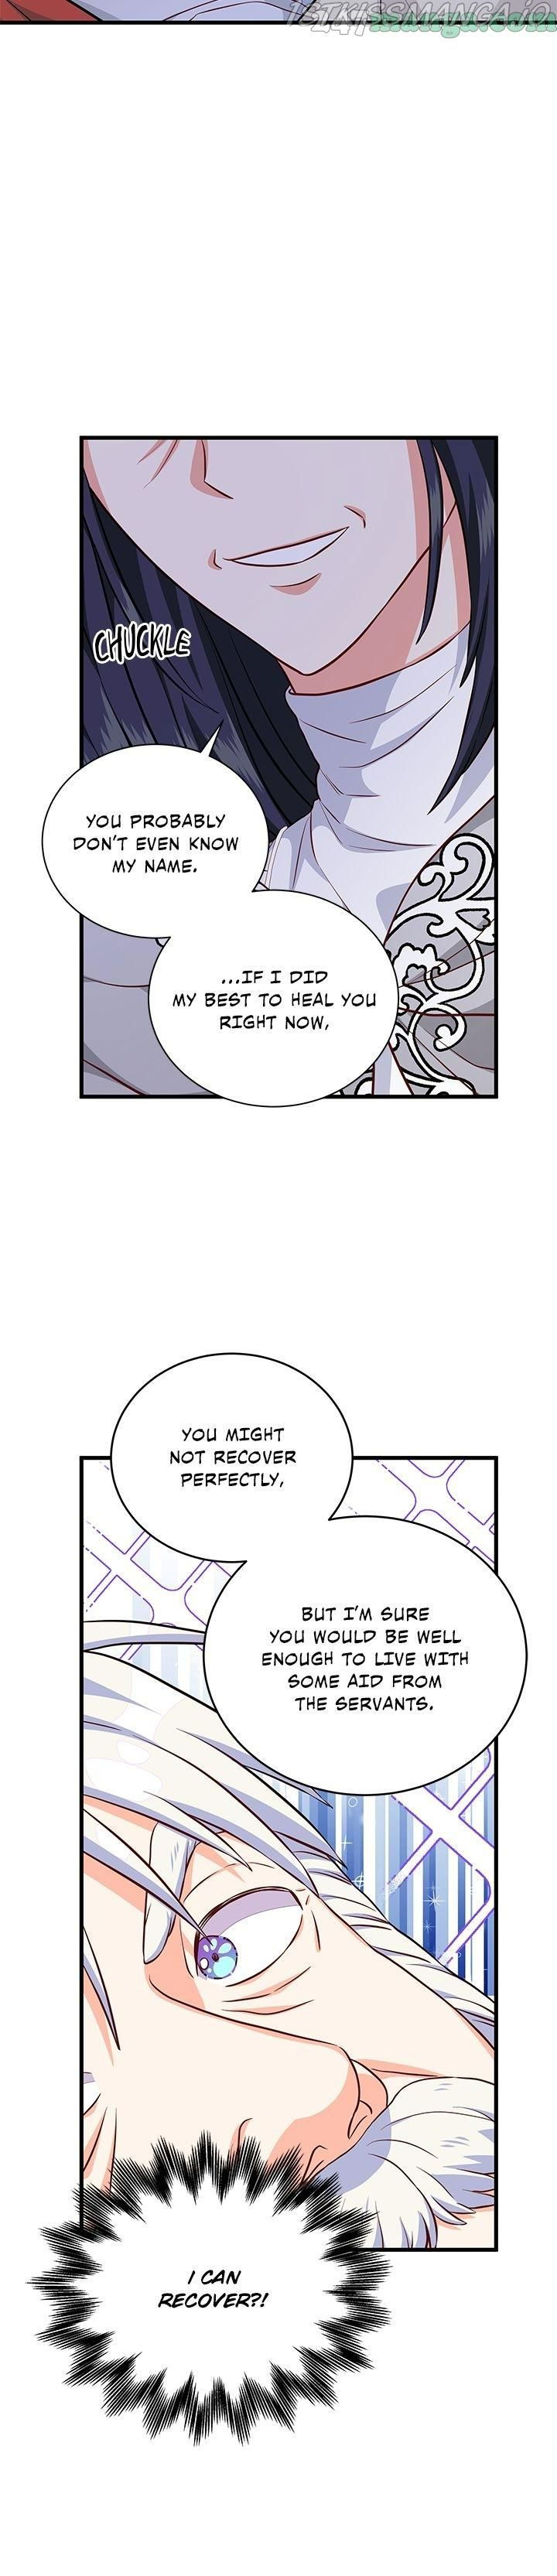 Priscilla's Marriage Request Chapter 109 page 3